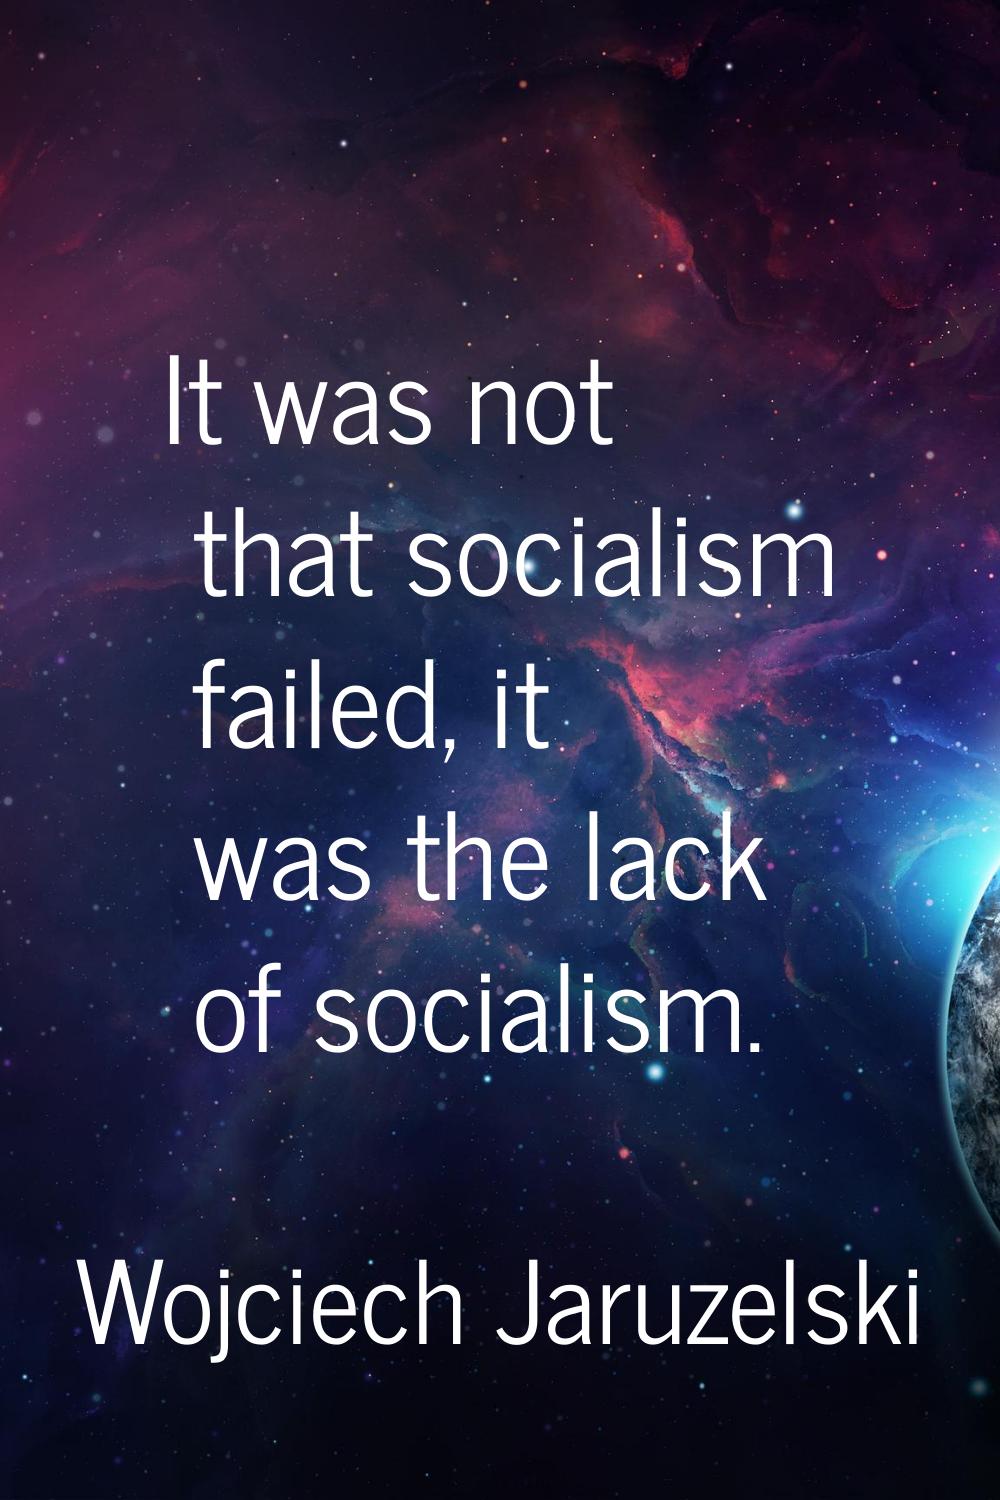 It was not that socialism failed, it was the lack of socialism.